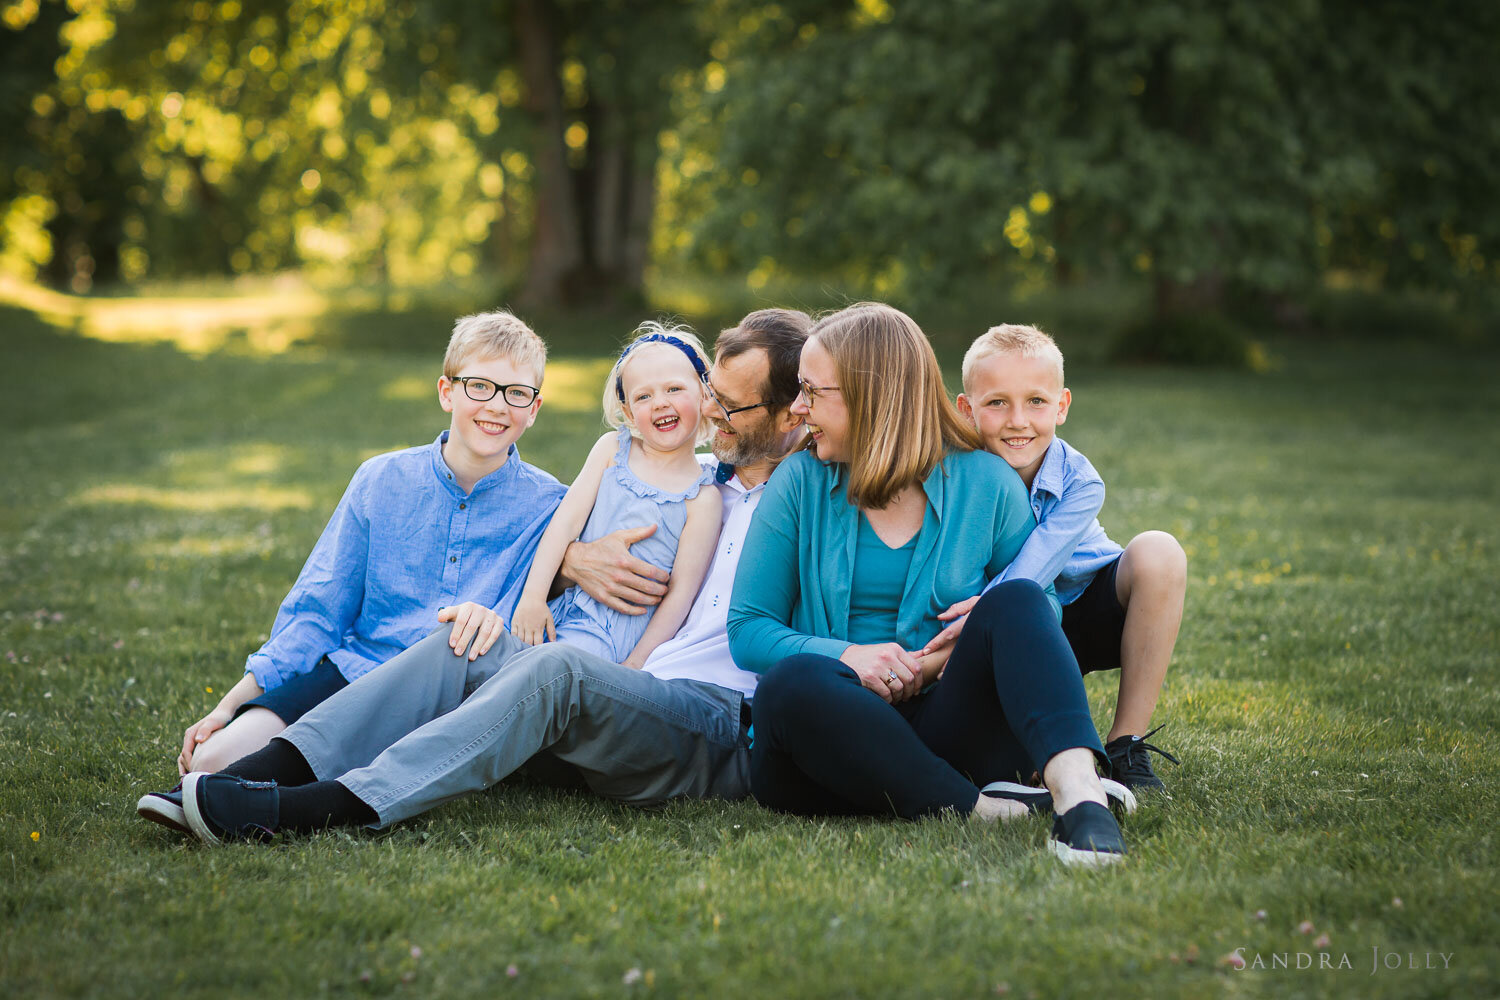 fun-stockholm-family-photo-session-by-sandra-jolly-photography.jpg